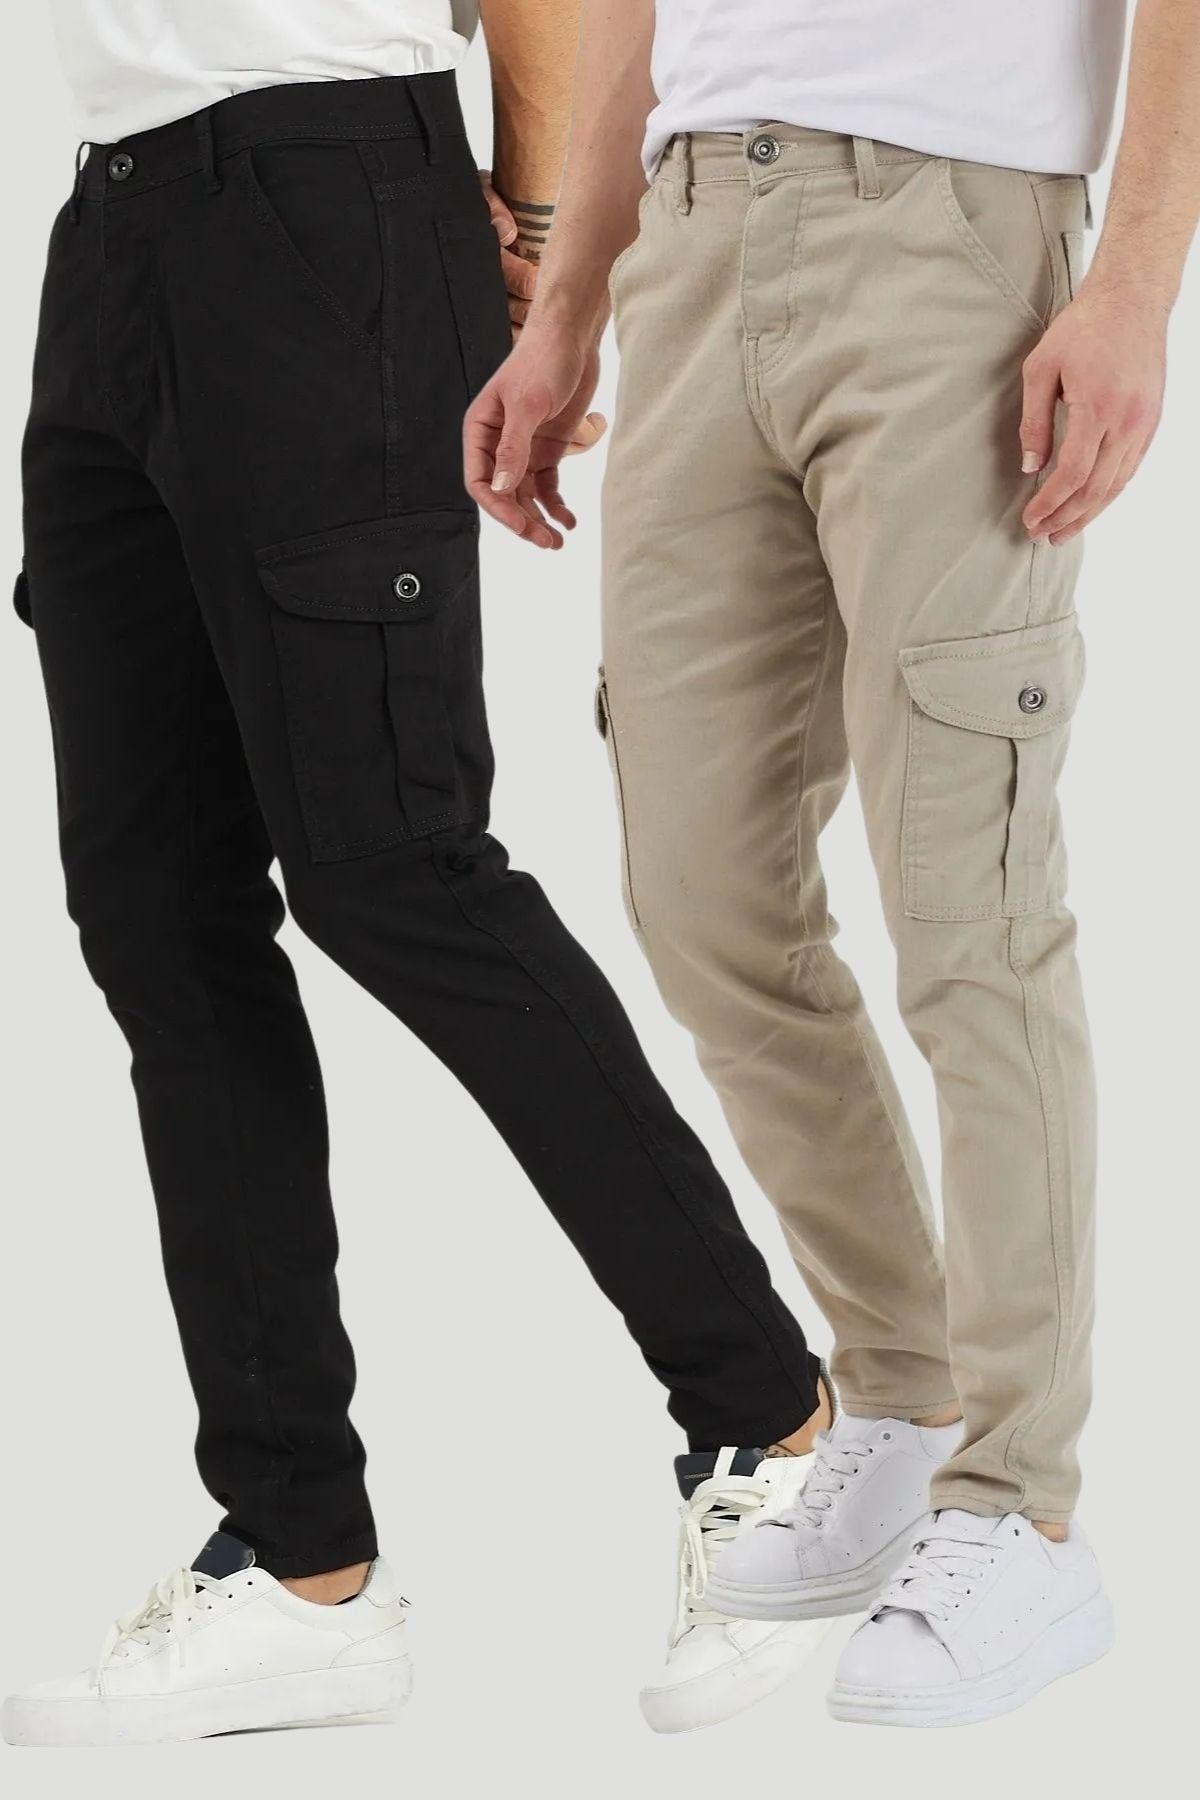 Express Athletic Slim Modern Chino Cargo Pant Brown Men's W28 L30 |  Vancouver Mall